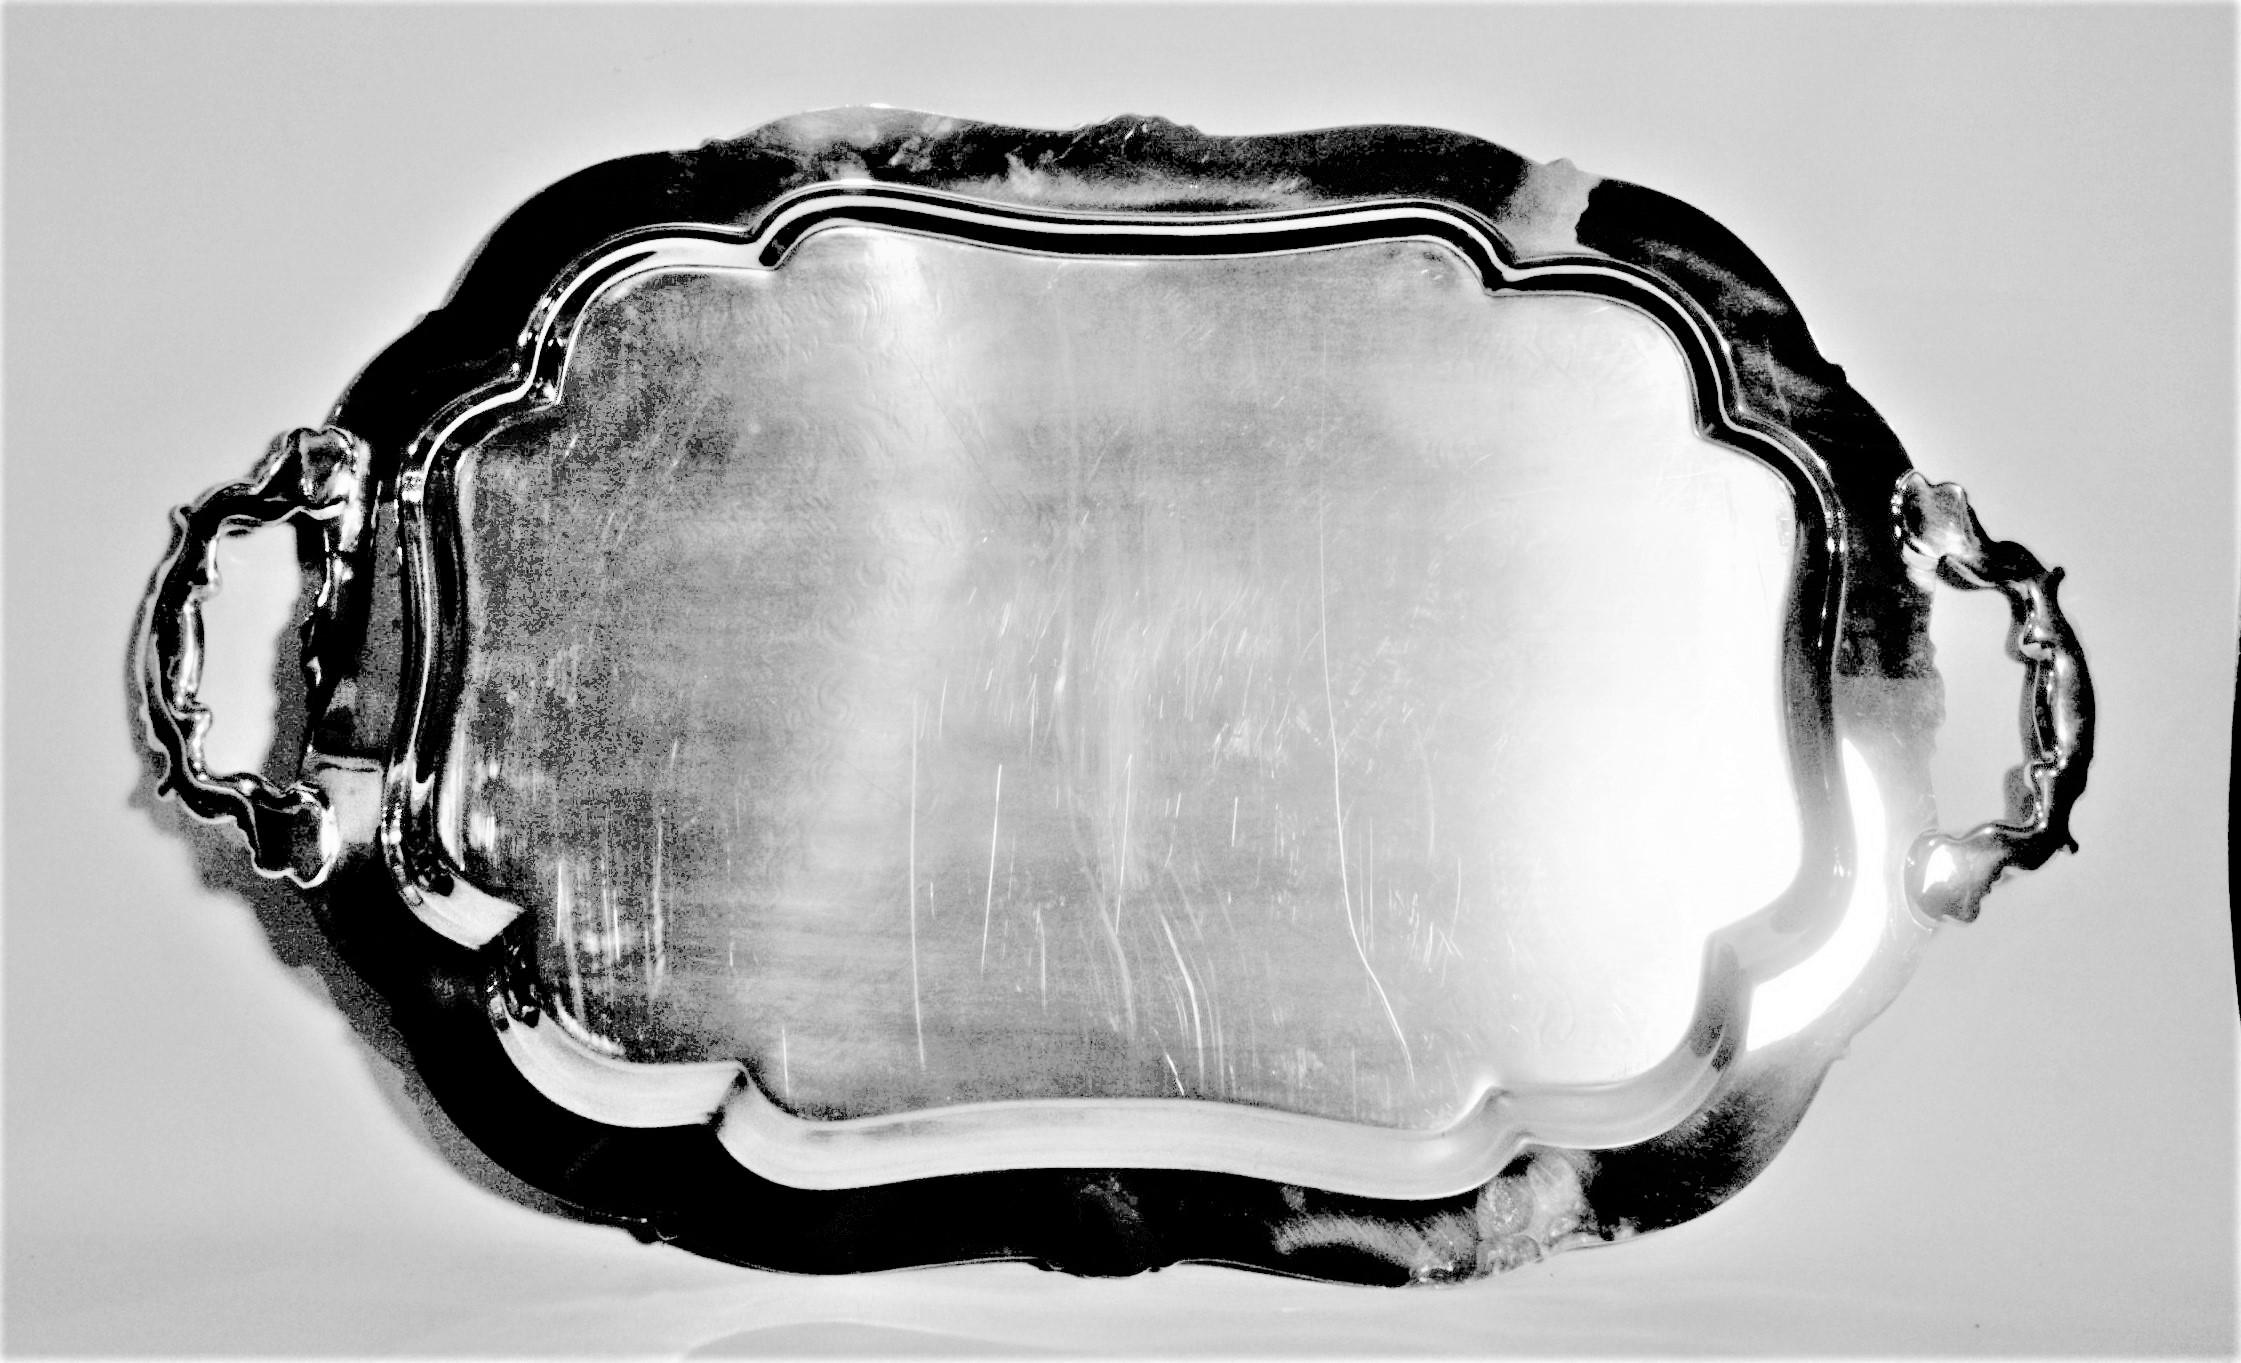 Large Antique Styled Silver Plated Serving Tray with Ornate Engraving & Handles 1